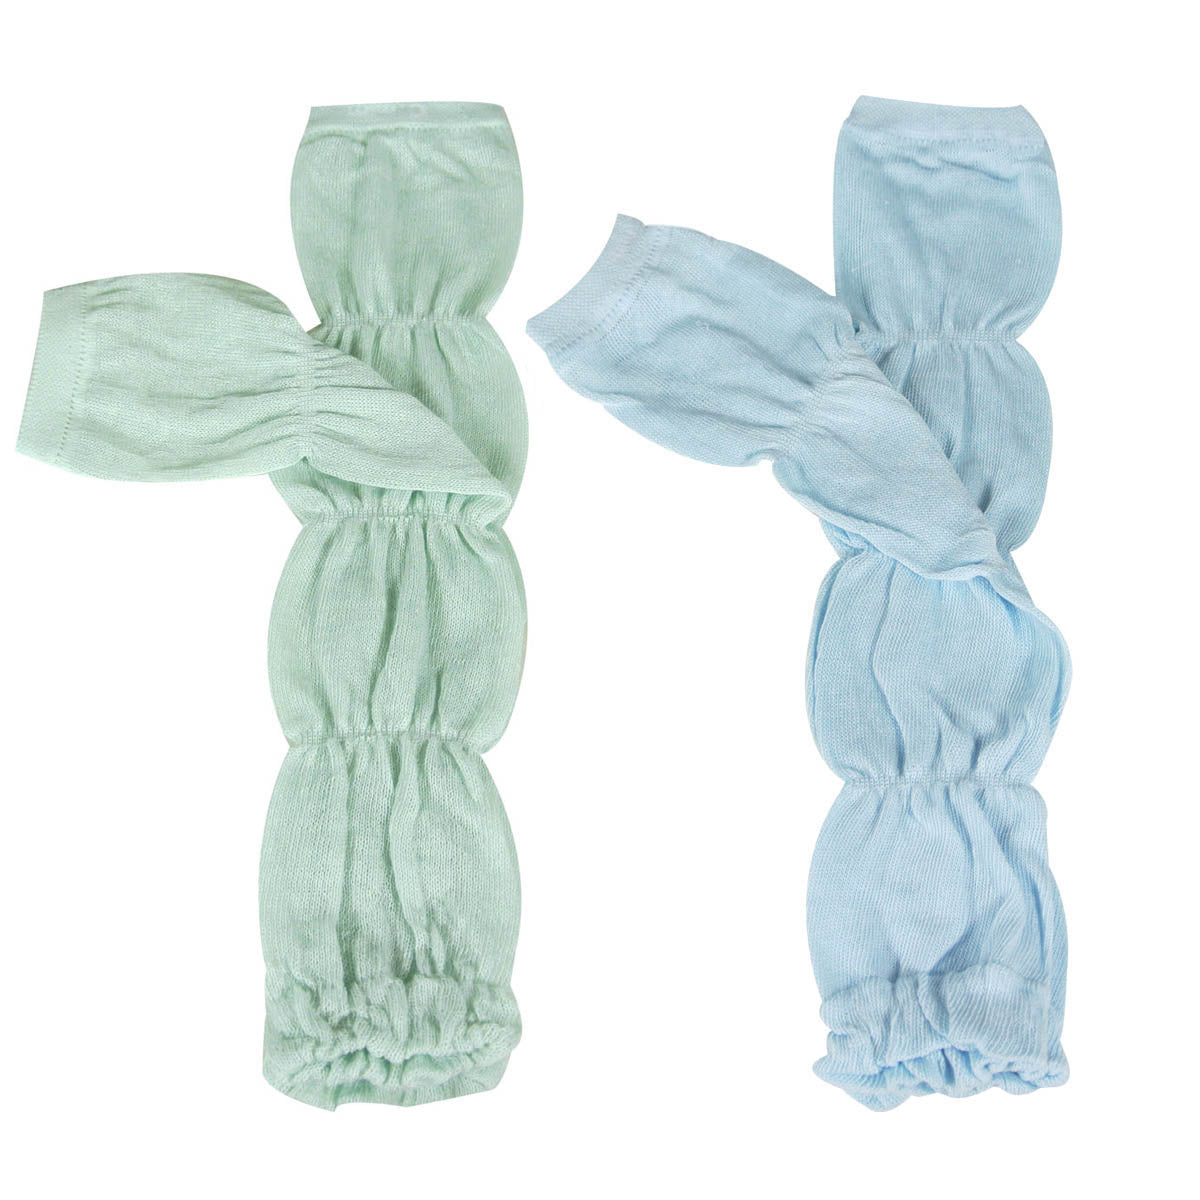 Wrapables Colorful Baby Leg Warmers (Set of 2)